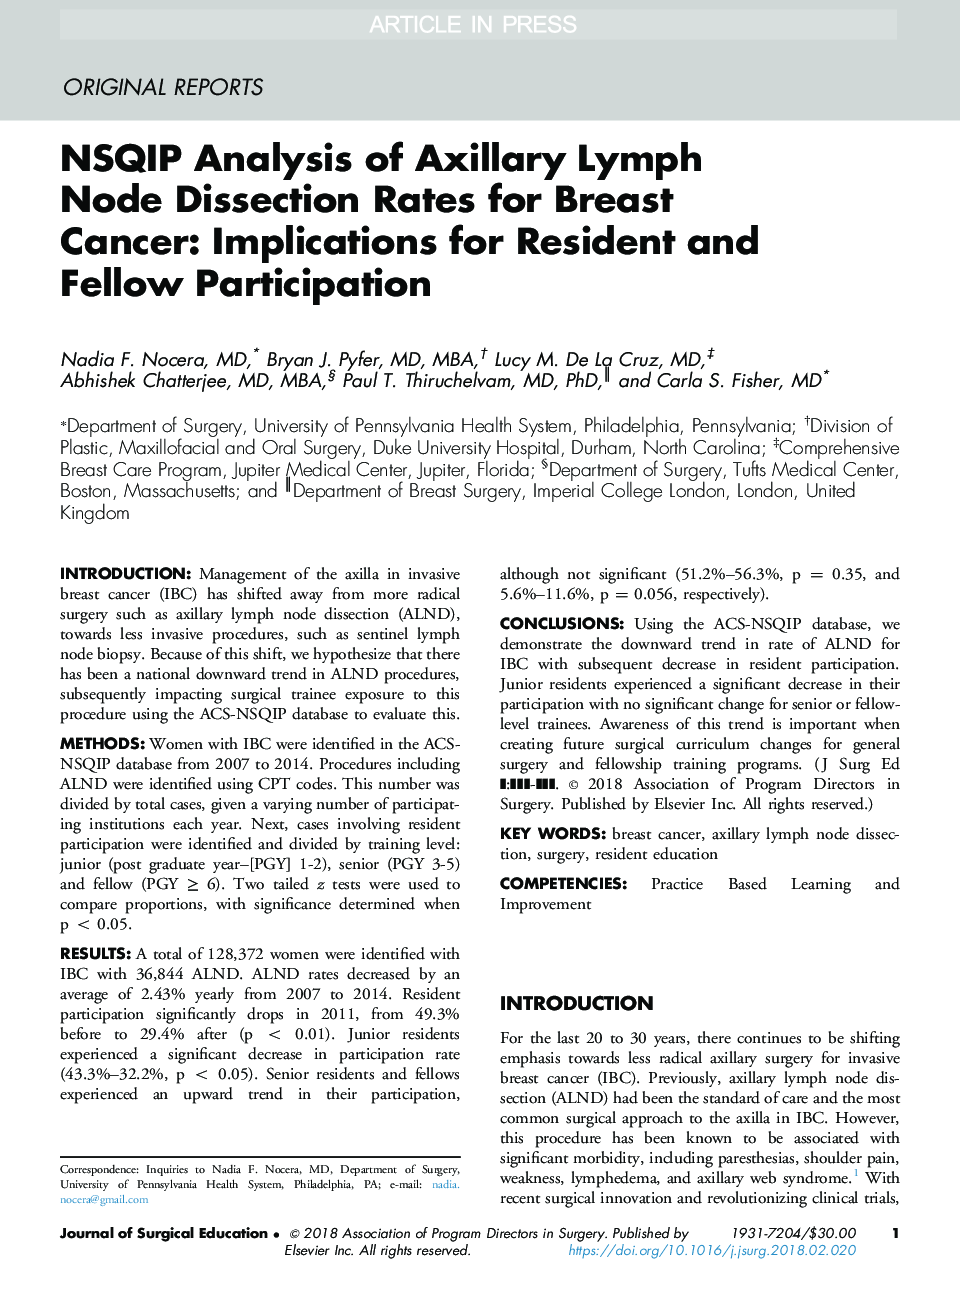 NSQIP Analysis of Axillary Lymph Node Dissection Rates for Breast Cancer: Implications for Resident and Fellow Participation